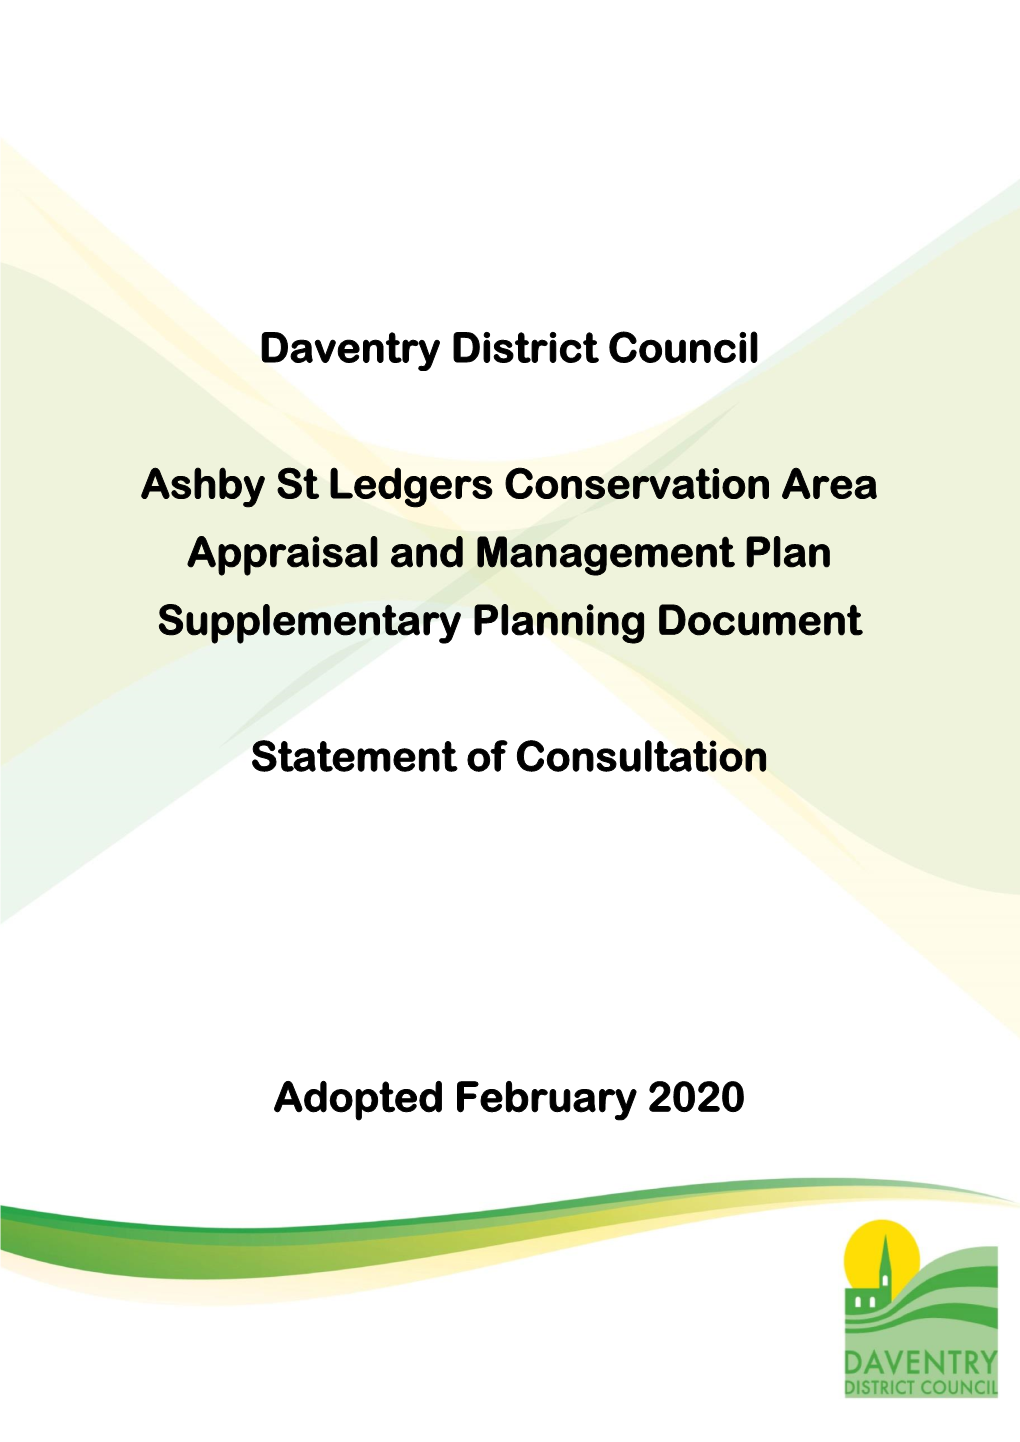 Ashby St Ledgers Statement of Consultation